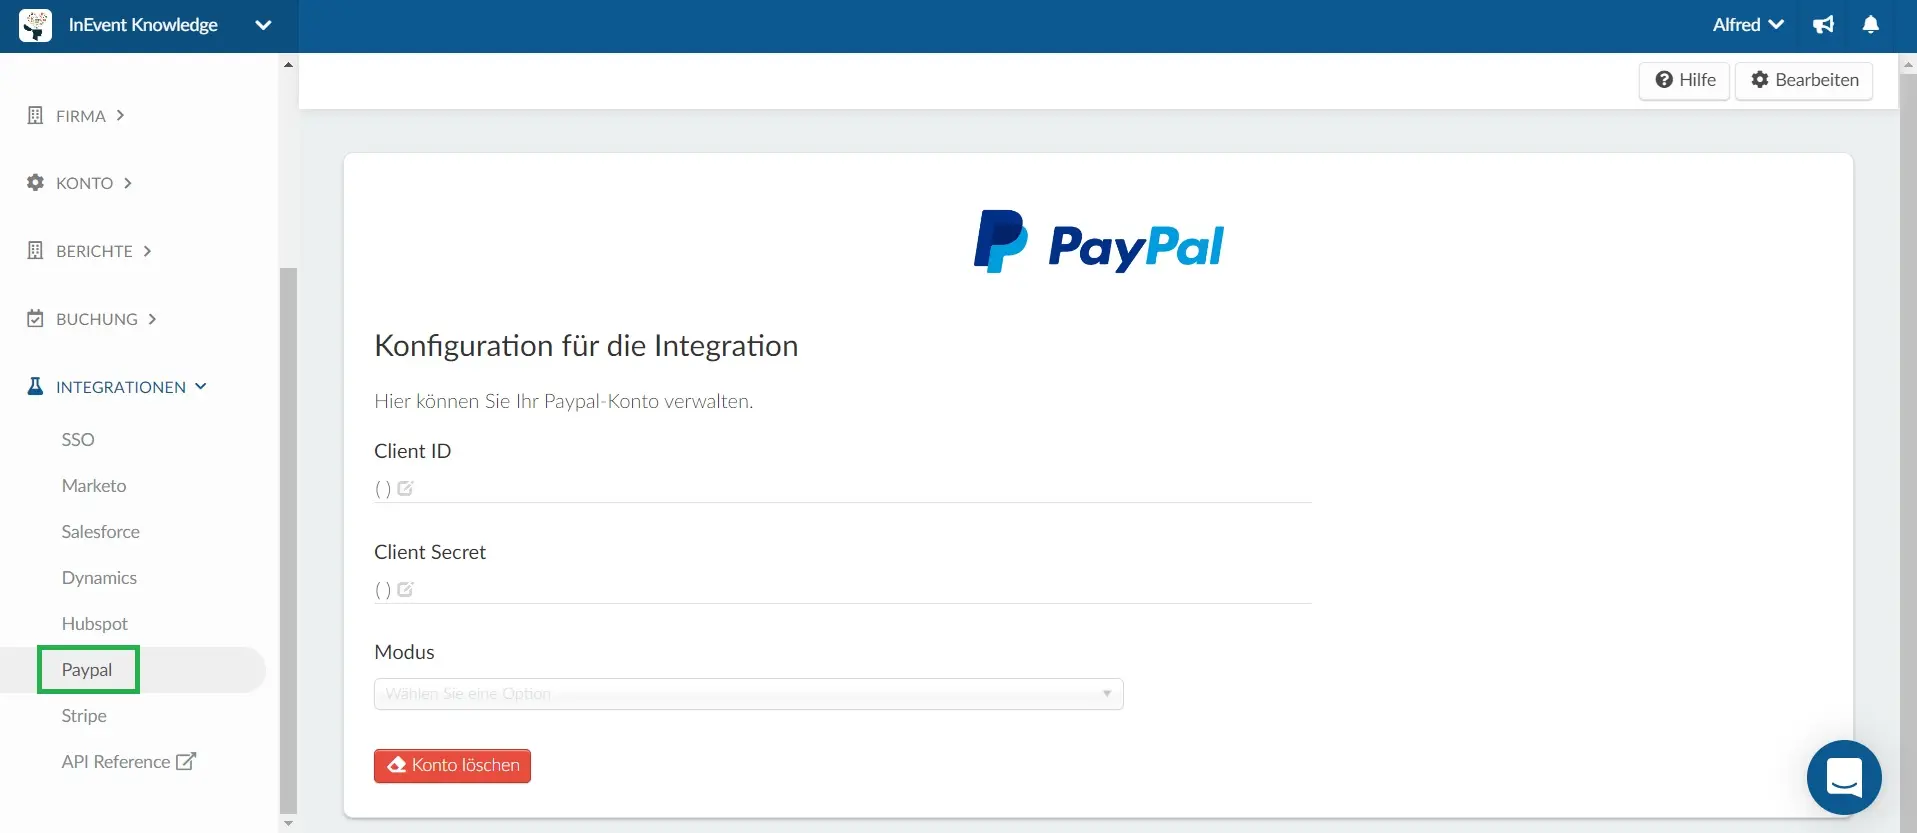 Paypal integration at the company level